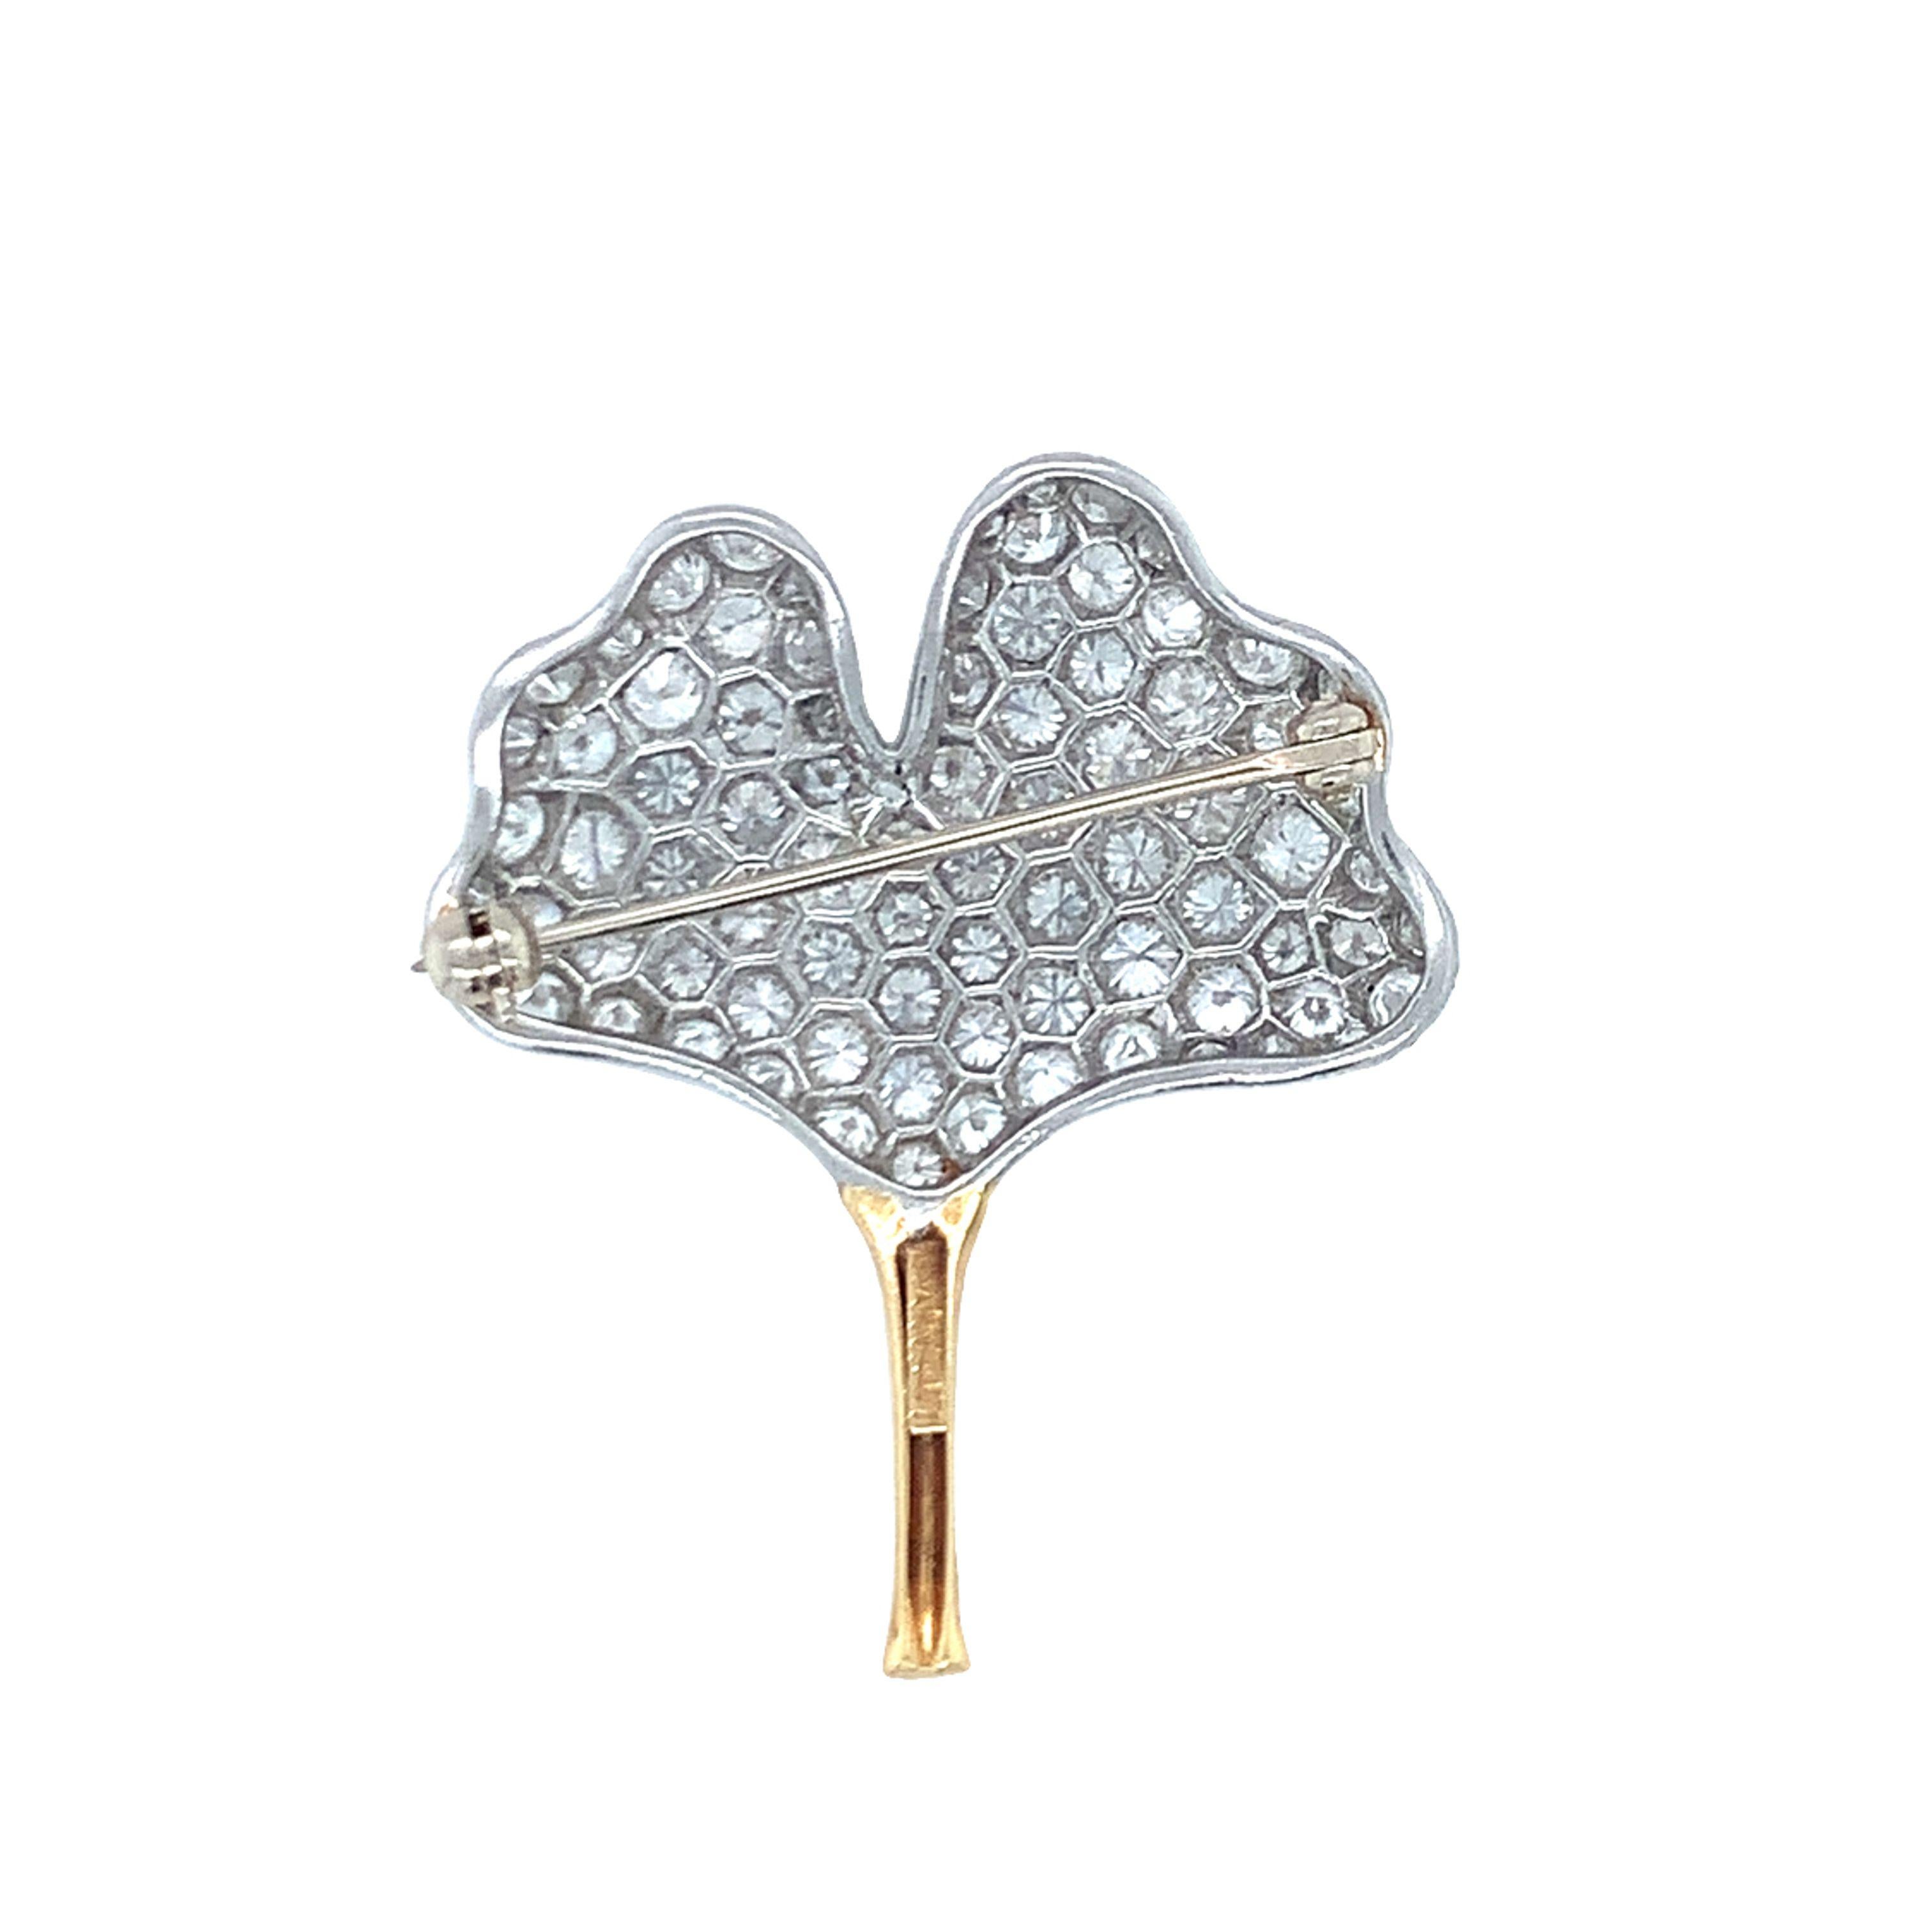 One gingko leaf motif diamond pin in platinum and 18k yellow gold by Tiffany & Co. featuring 80 pave set, round brilliant cut diamonds totaling 4.42 ct. with F color and VVS-1 clarity. Accompanied by power blue Tiffany & Co. pouch.

Enchanting,